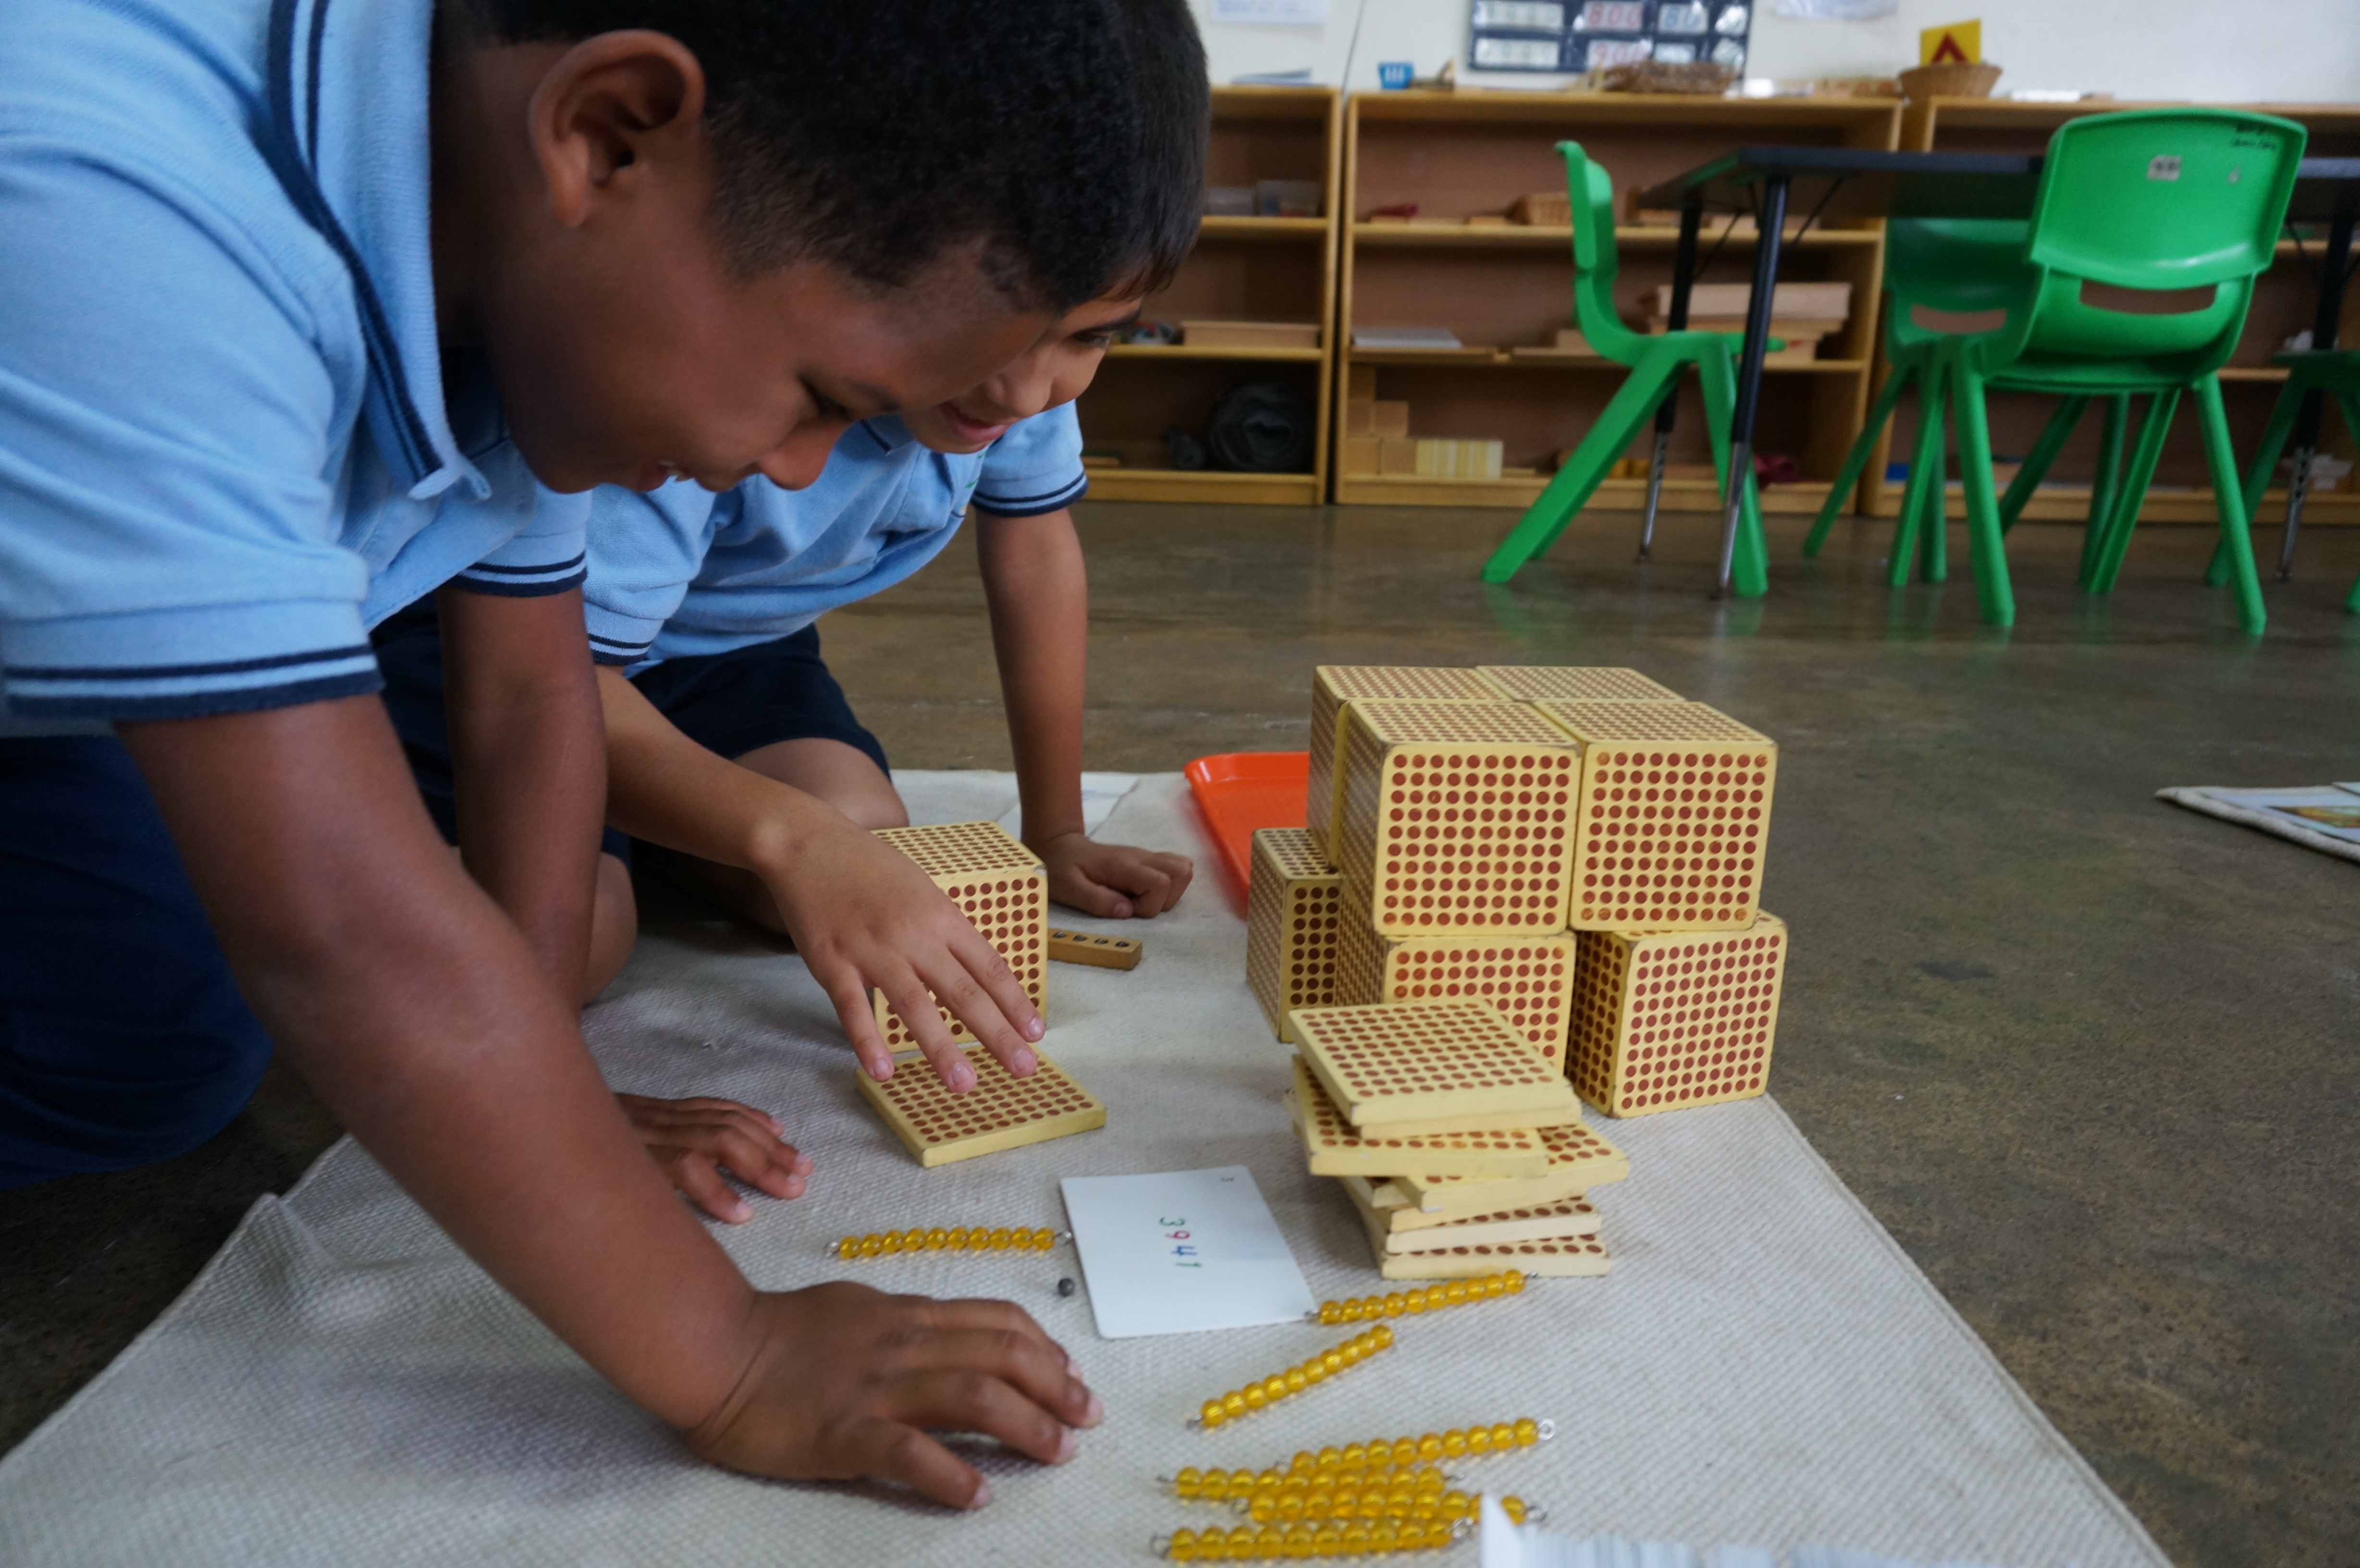 young male students in blue shirts working with blocks that have red dots on each side